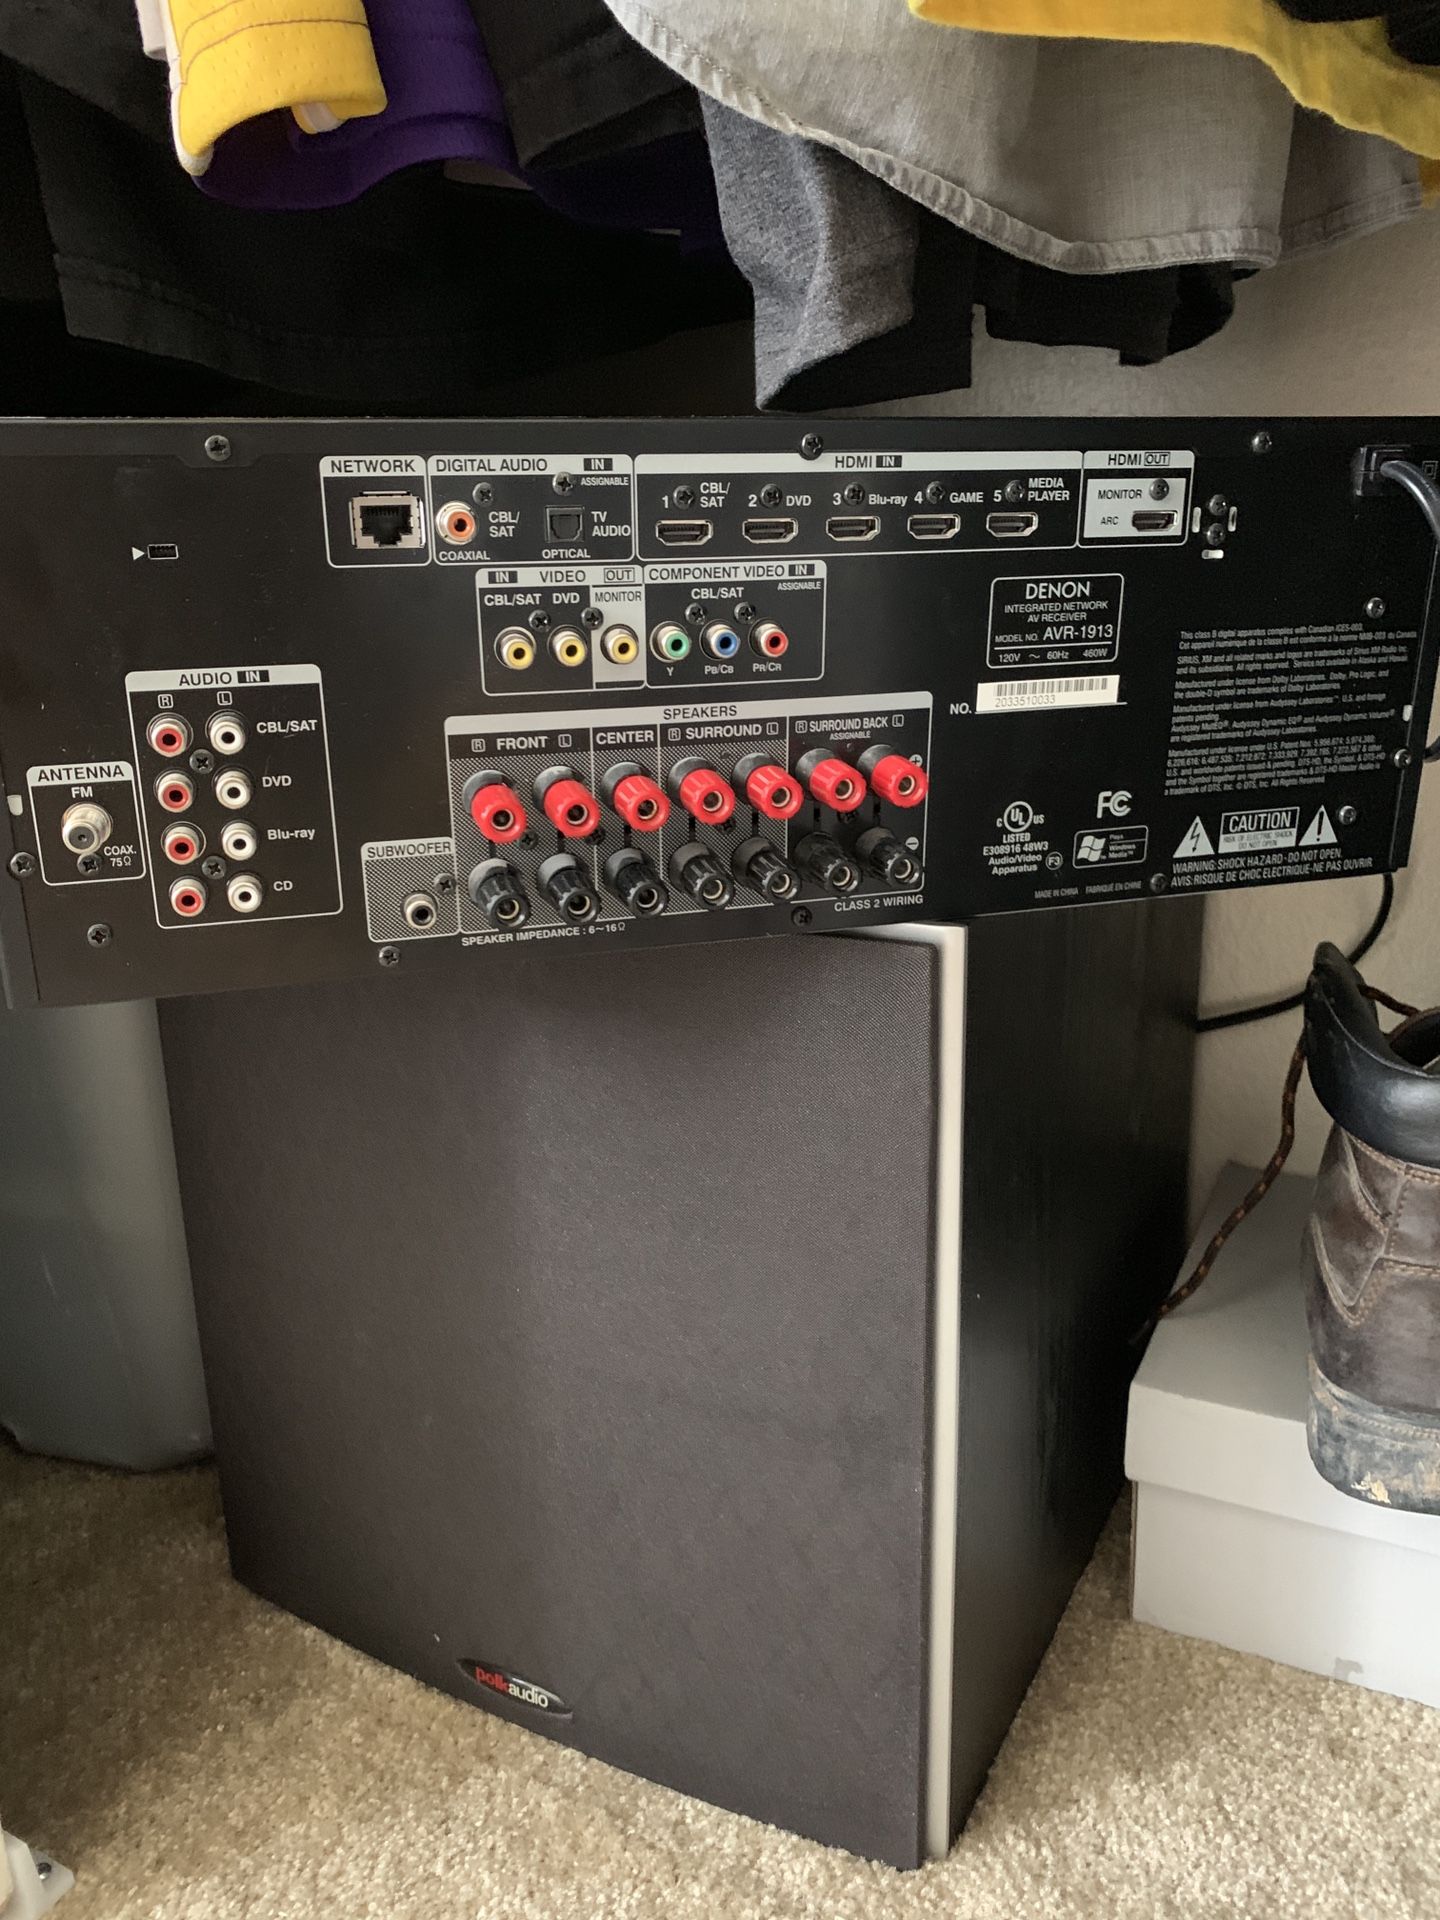 Denon receiver the condition is new, also selling a Polk audio bass speaker new condition as well